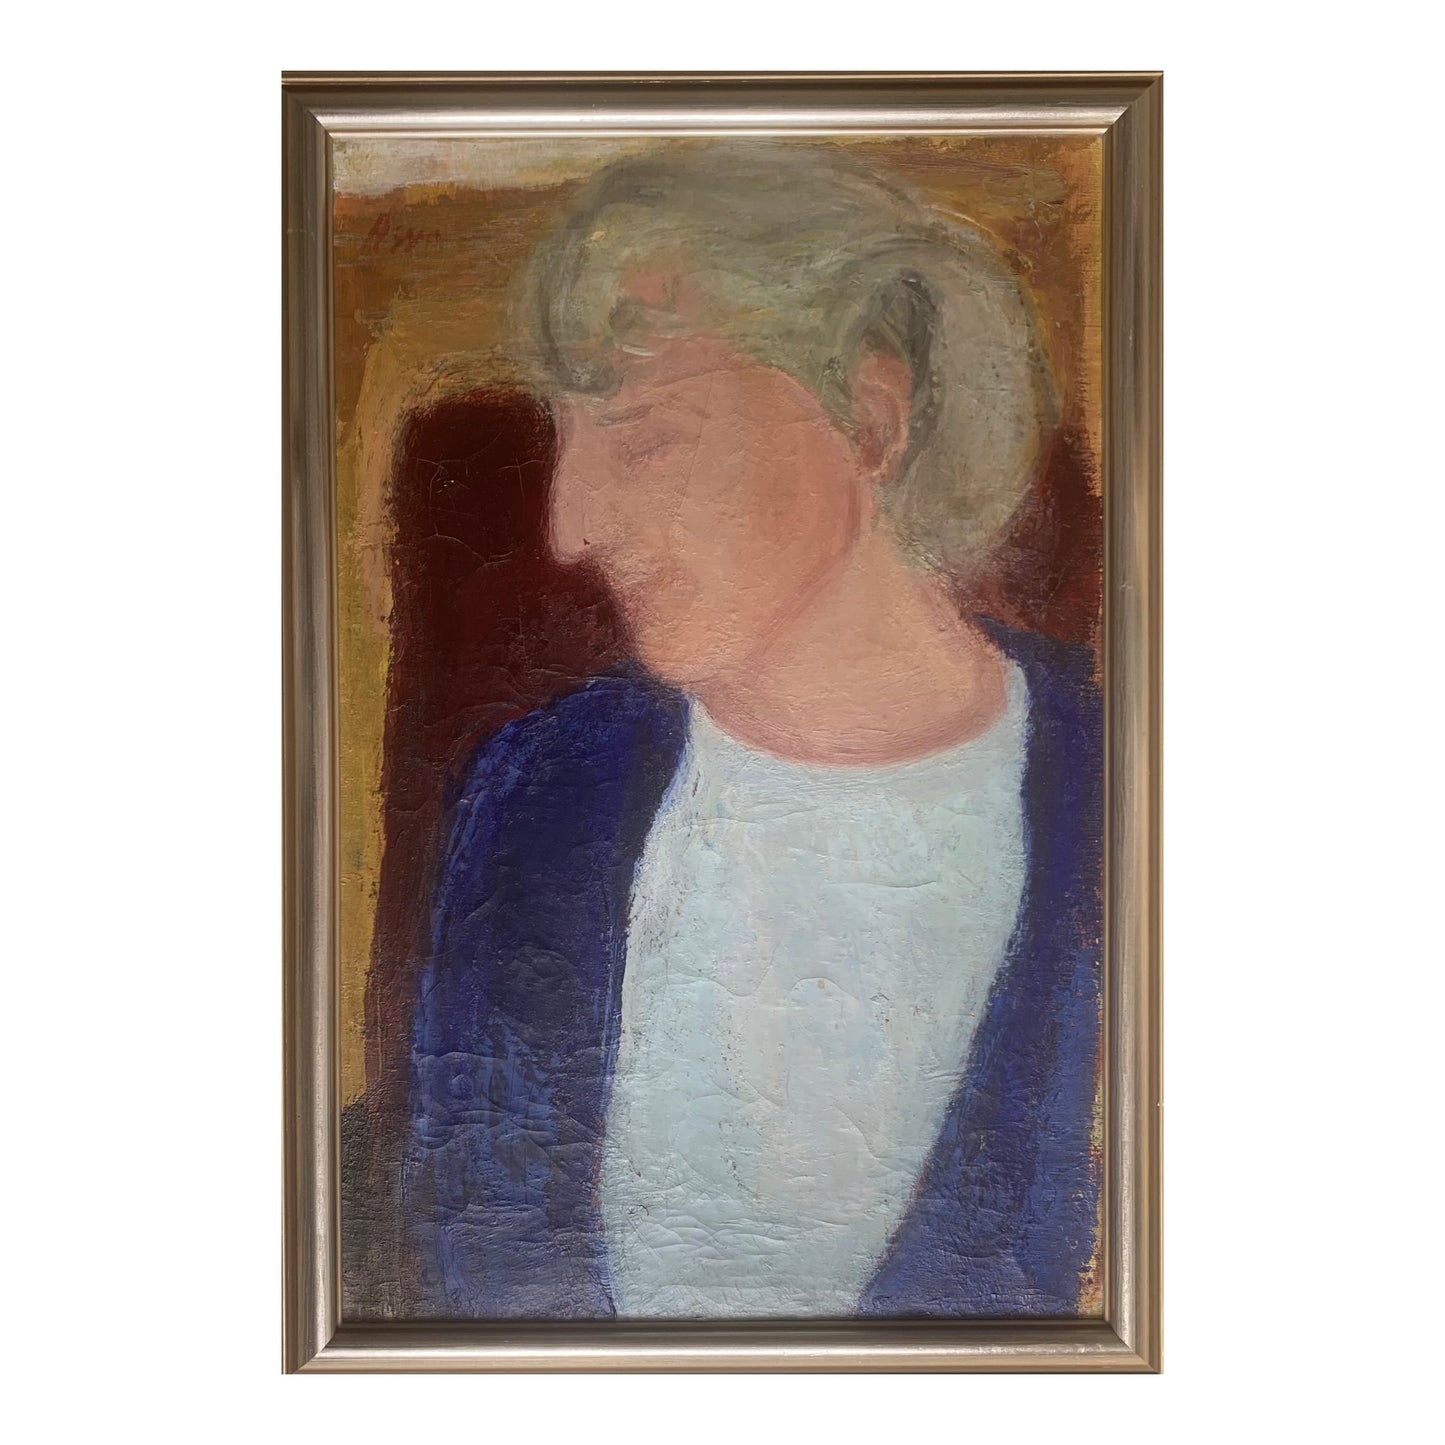 Knud Agger. "Lady in blue, portrait of the artist's wife", approx. 1939